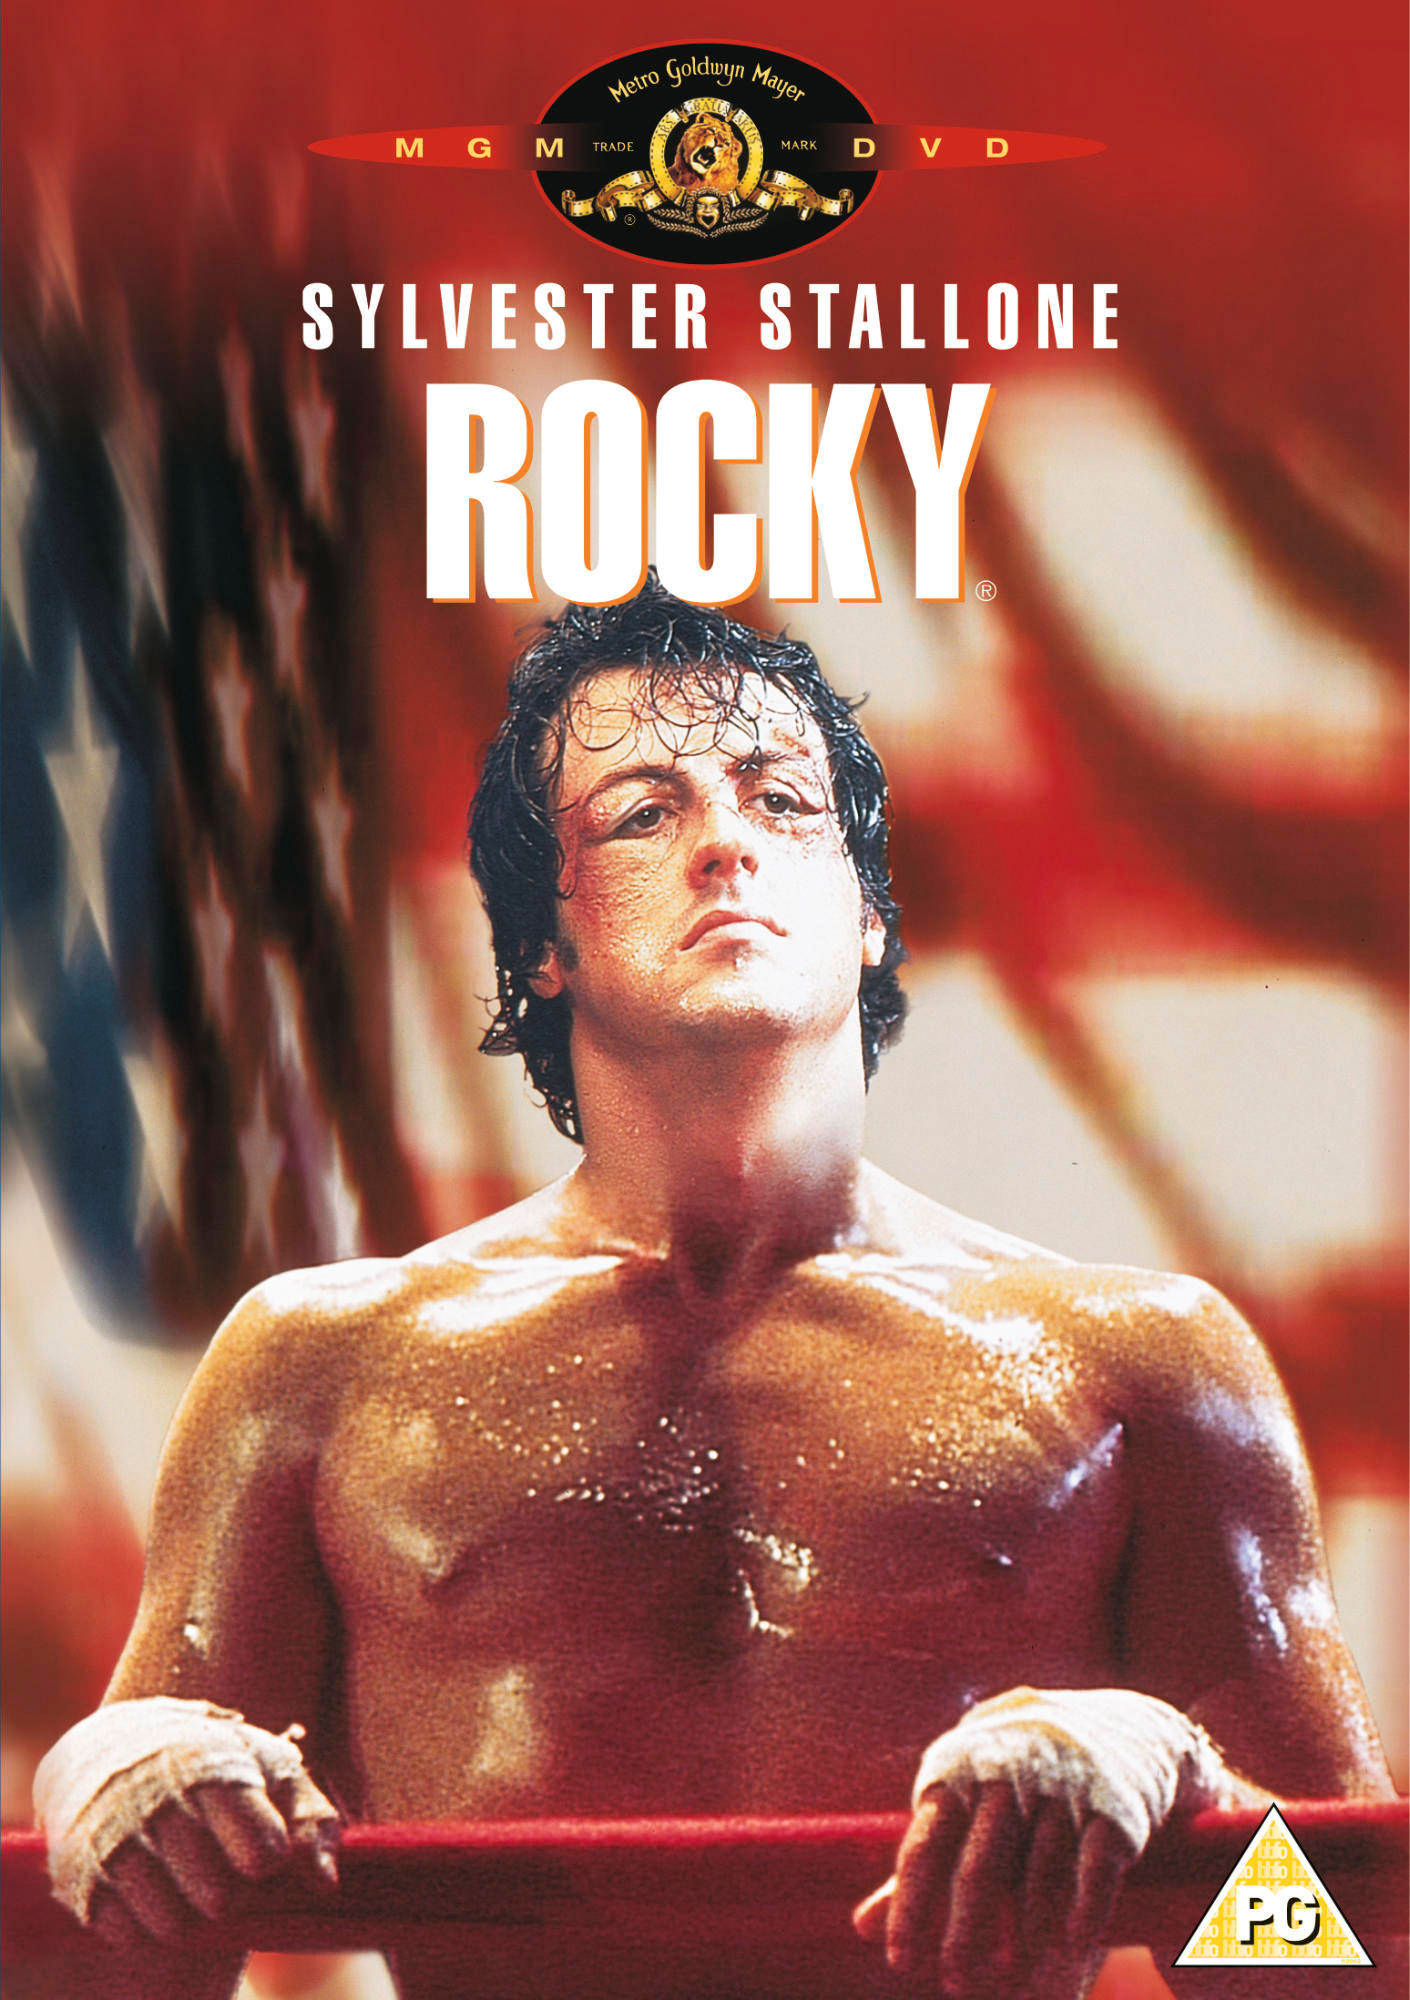  
Rocky [1977] (DVD) Sylvester Stallone, Talia Shire, Burt Young, Carl Weathers